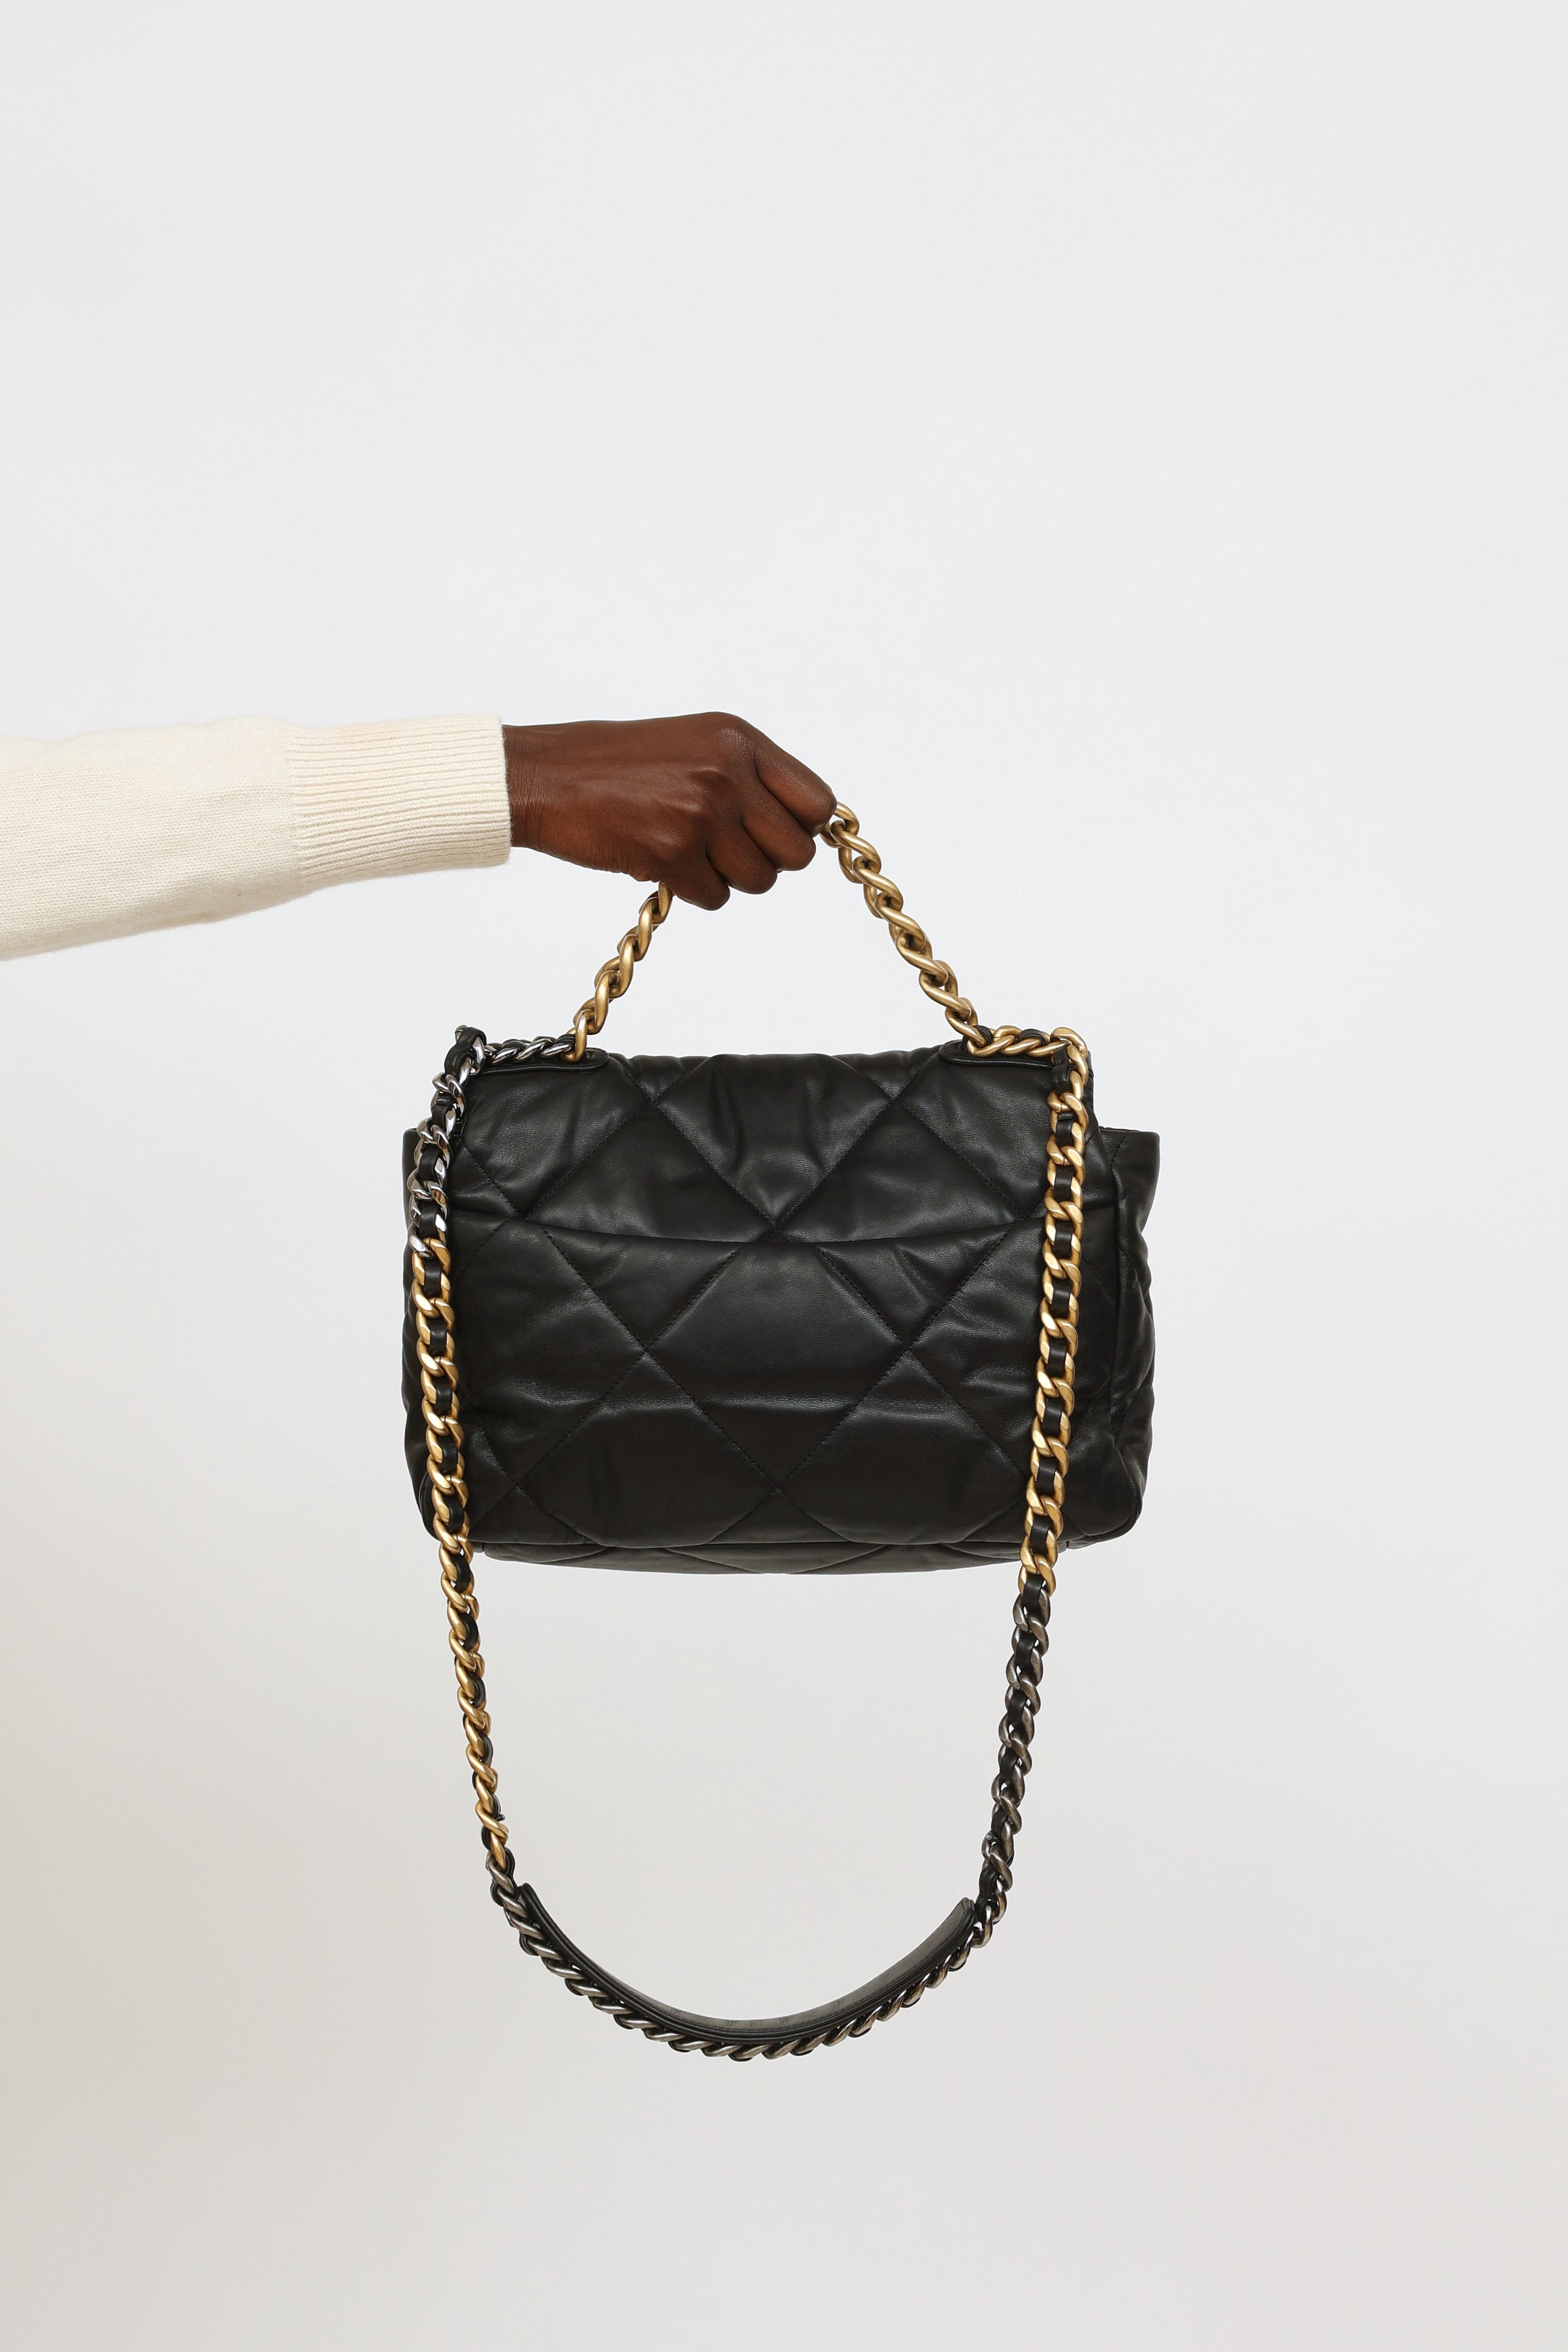 CHANEL 19 Black Goatskin 2020 Chain Quilted Maxi Bag – Fashion Reloved